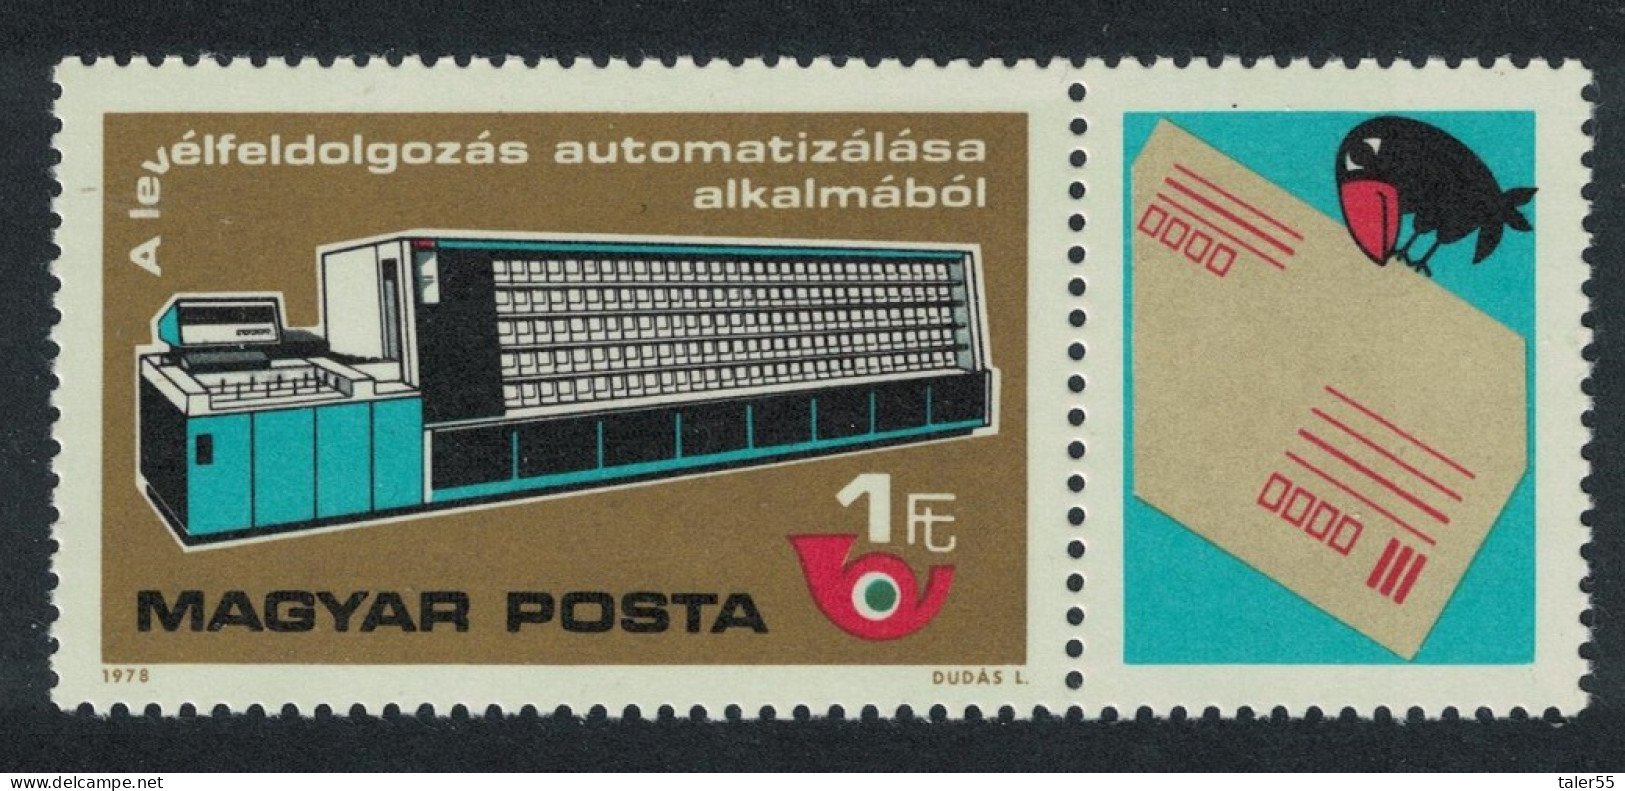 Hungary Automation Of Letter Sorting 1978 MNH SG#3204 - Ungebraucht